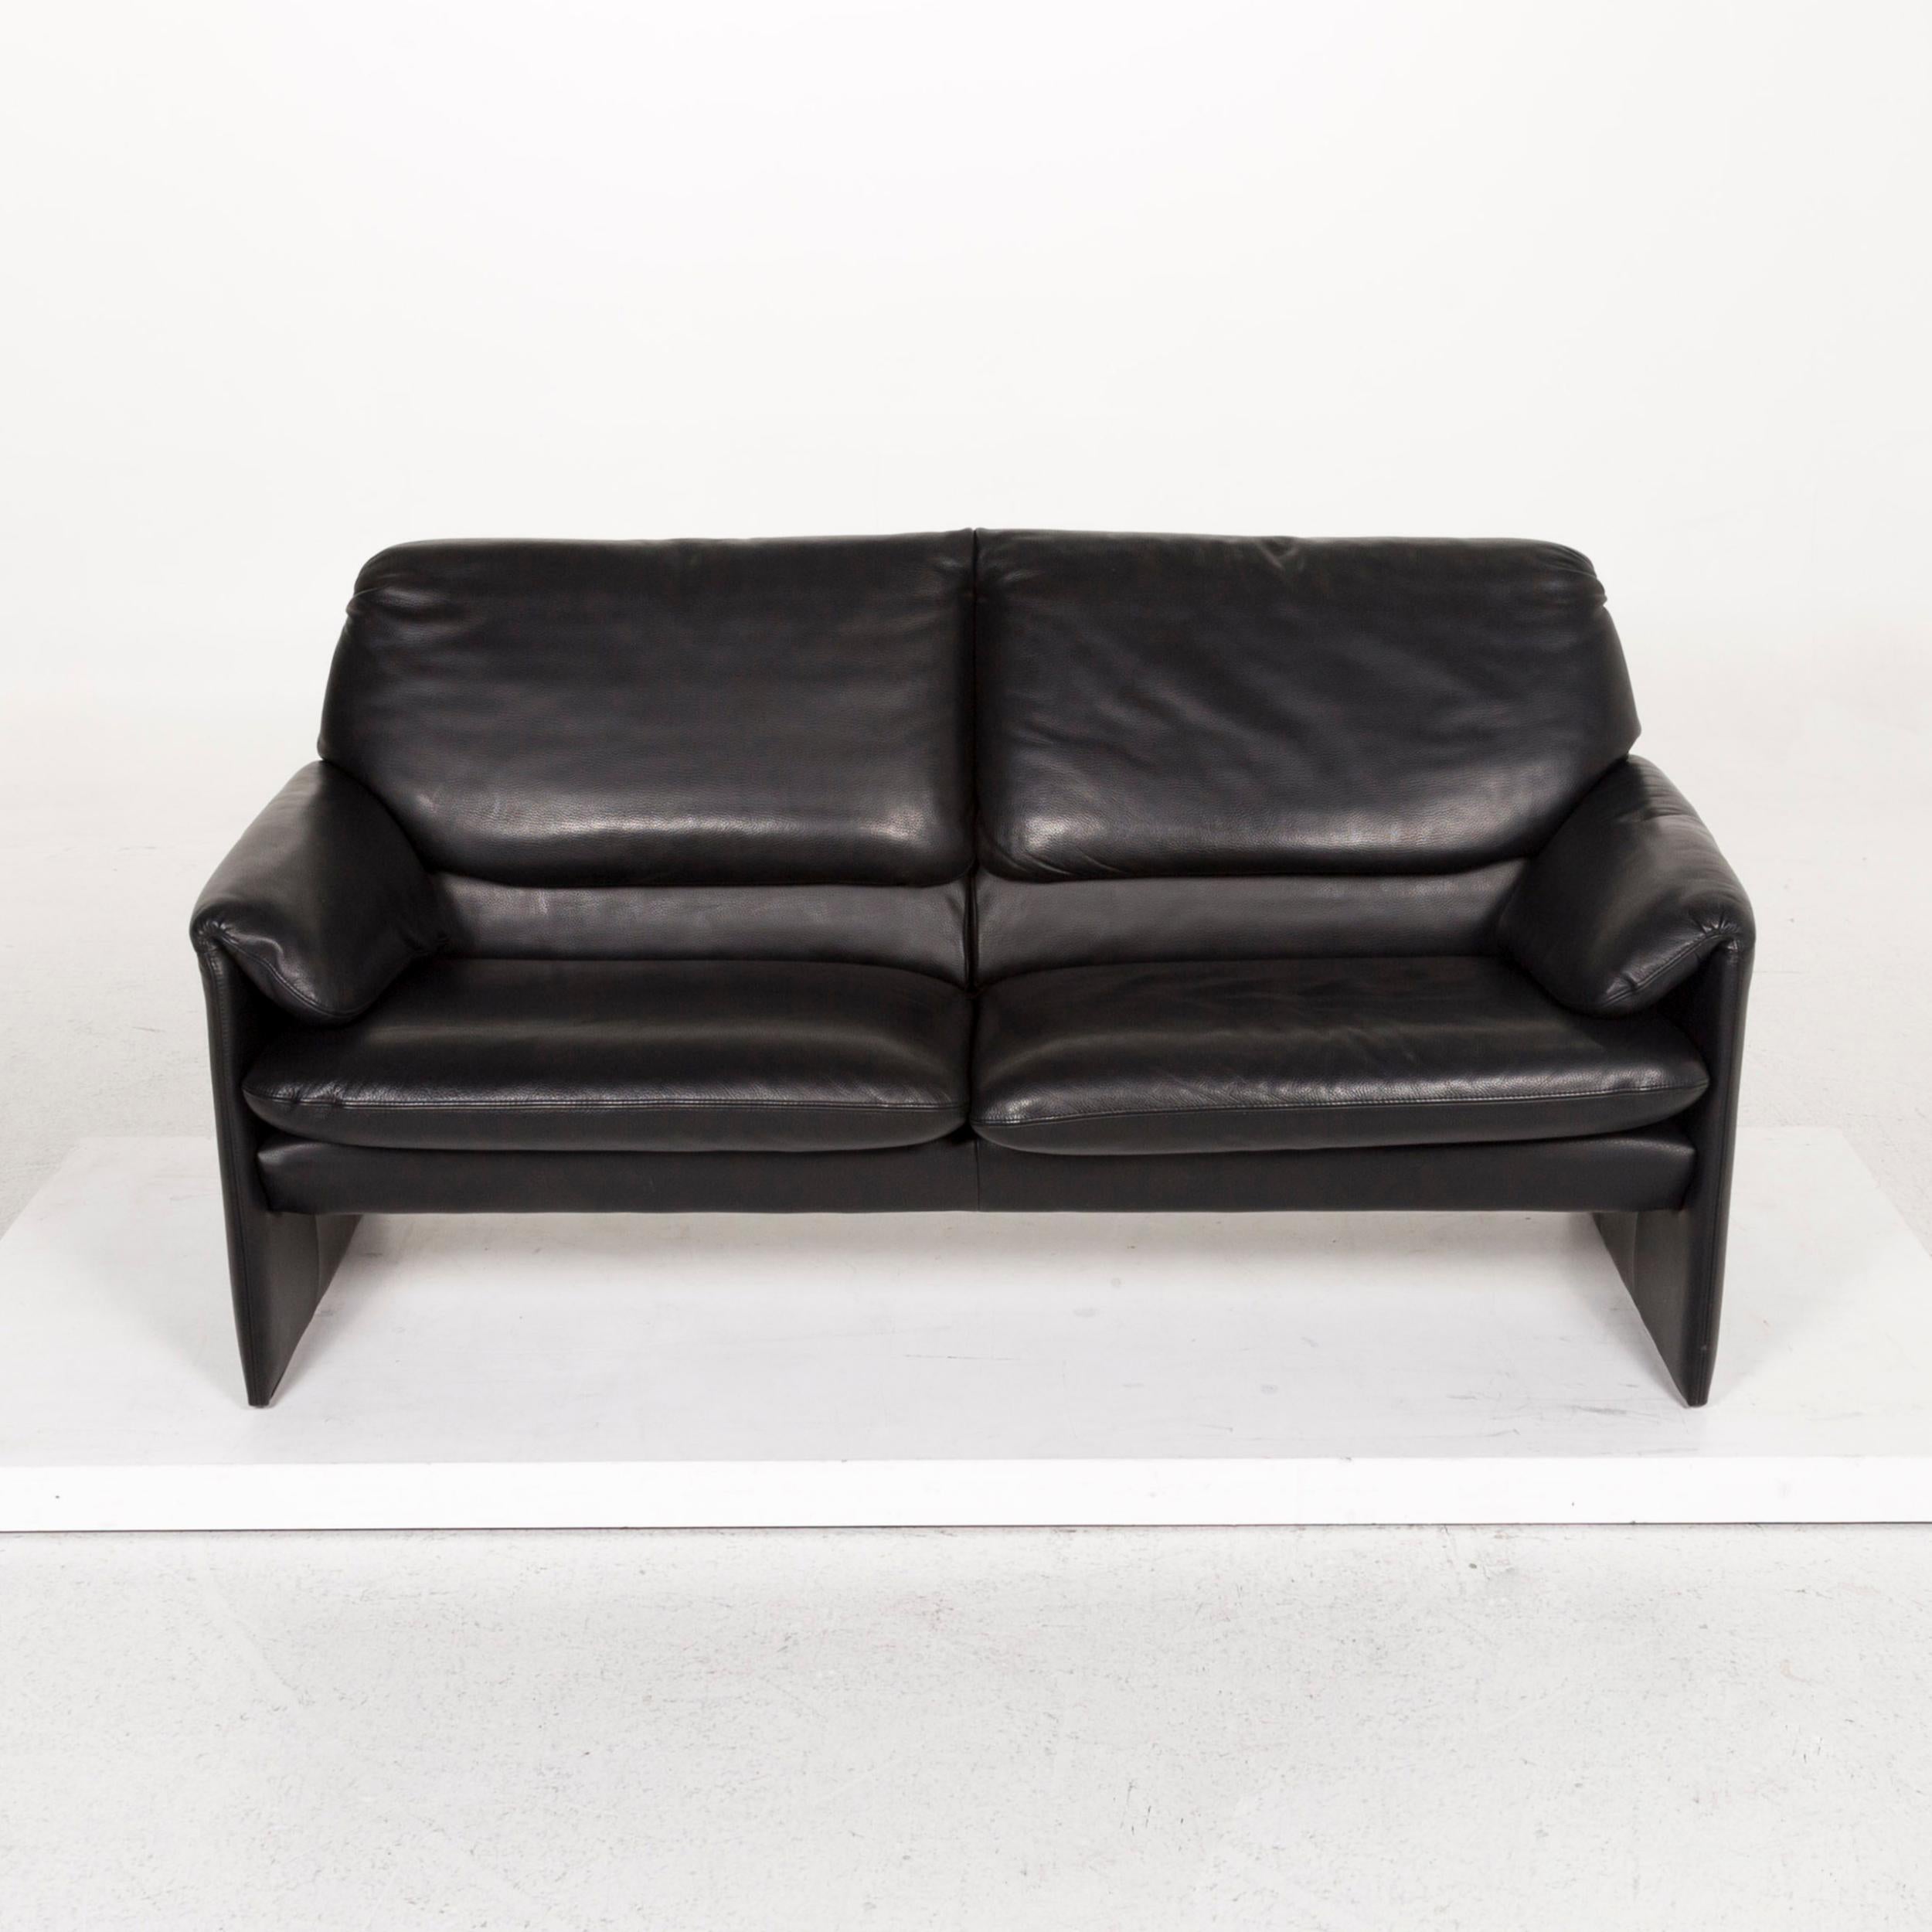 Contemporary Leolux Leather Sofa Black Two-Seat Couch For Sale